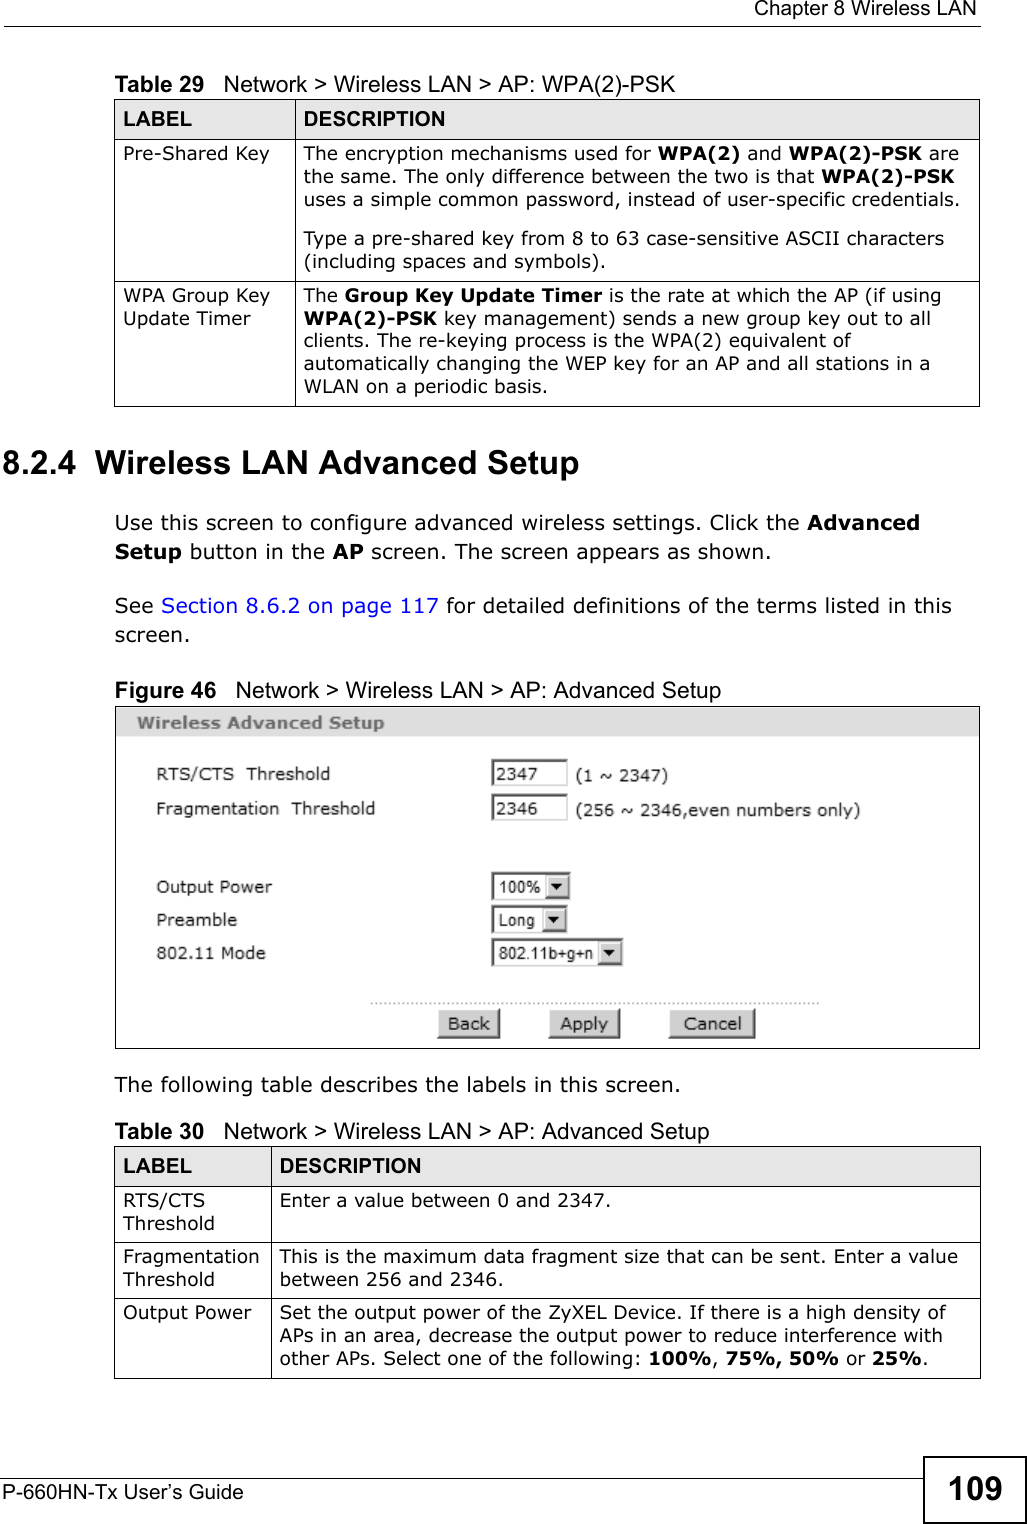  Chapter 8 Wireless LANP-660HN-Tx User’s Guide 1098.2.4  Wireless LAN Advanced SetupUse this screen to configure advanced wireless settings. Click the Advanced Setup button in the AP screen. The screen appears as shown.See Section 8.6.2 on page 117 for detailed definitions of the terms listed in this screen.Figure 46   Network &gt; Wireless LAN &gt; AP: Advanced SetupThe following table describes the labels in this screen. Pre-Shared Key  The encryption mechanisms used for WPA(2) and WPA(2)-PSK are the same. The only difference between the two is that WPA(2)-PSK uses a simple common password, instead of user-specific credentials.Type a pre-shared key from 8 to 63 case-sensitive ASCII characters (including spaces and symbols).WPA Group Key Update TimerThe Group Key Update Timer is the rate at which the AP (if using WPA(2)-PSK key management) sends a new group key out to all clients. The re-keying process is the WPA(2) equivalent of automatically changing the WEP key for an AP and all stations in a WLAN on a periodic basis.Table 29   Network &gt; Wireless LAN &gt; AP: WPA(2)-PSKLABEL DESCRIPTIONTable 30   Network &gt; Wireless LAN &gt; AP: Advanced SetupLABEL DESCRIPTIONRTS/CTS ThresholdEnter a value between 0 and 2347. Fragmentation ThresholdThis is the maximum data fragment size that can be sent. Enter a value between 256 and 2346. Output Power Set the output power of the ZyXEL Device. If there is a high density of APs in an area, decrease the output power to reduce interference with other APs. Select one of the following: 100%, 75%, 50% or 25%. 